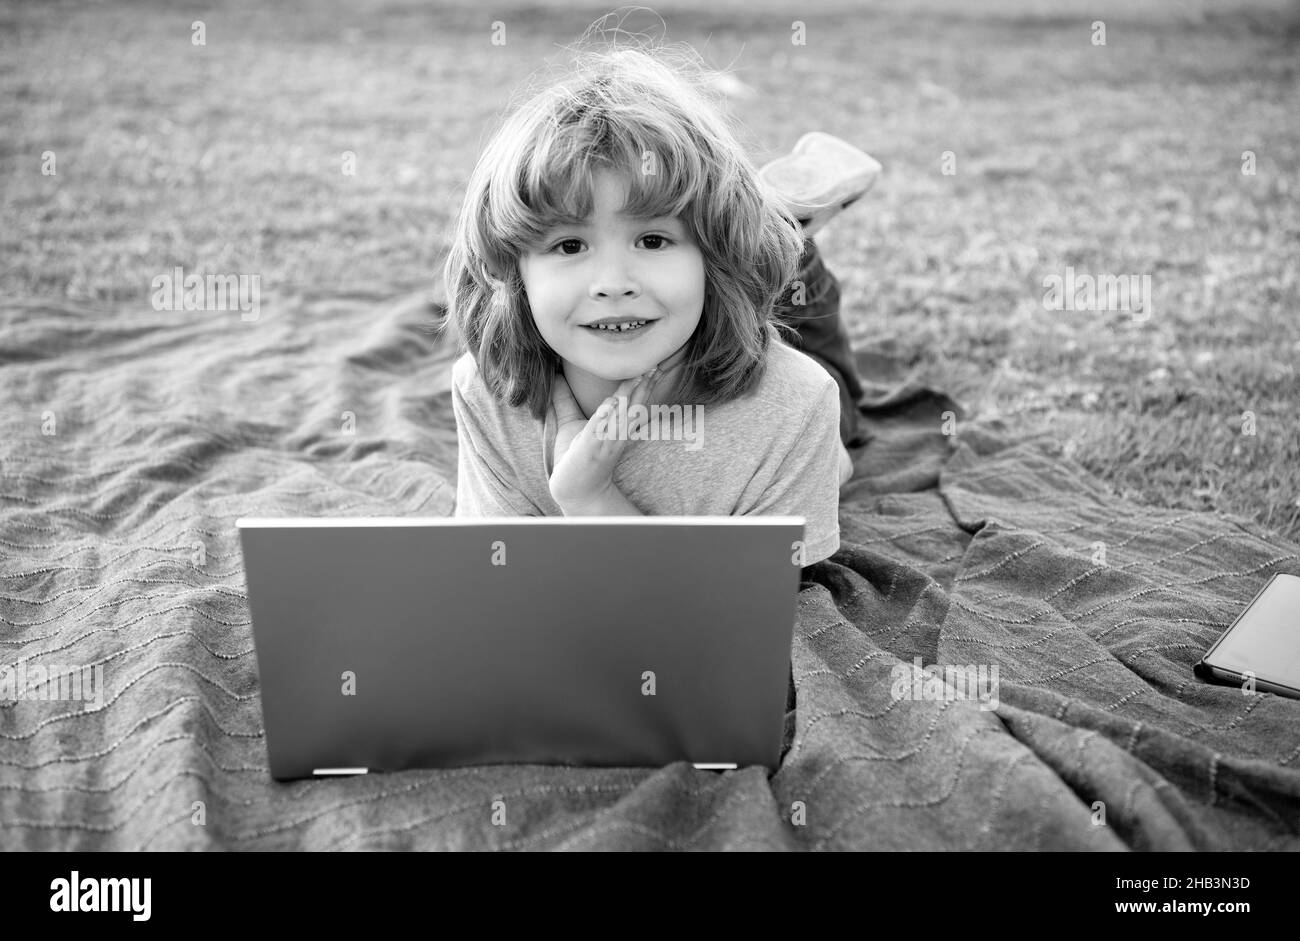 Discover online learning. Boy child use laptop natural outdoors. Using learning technology Stock Photo